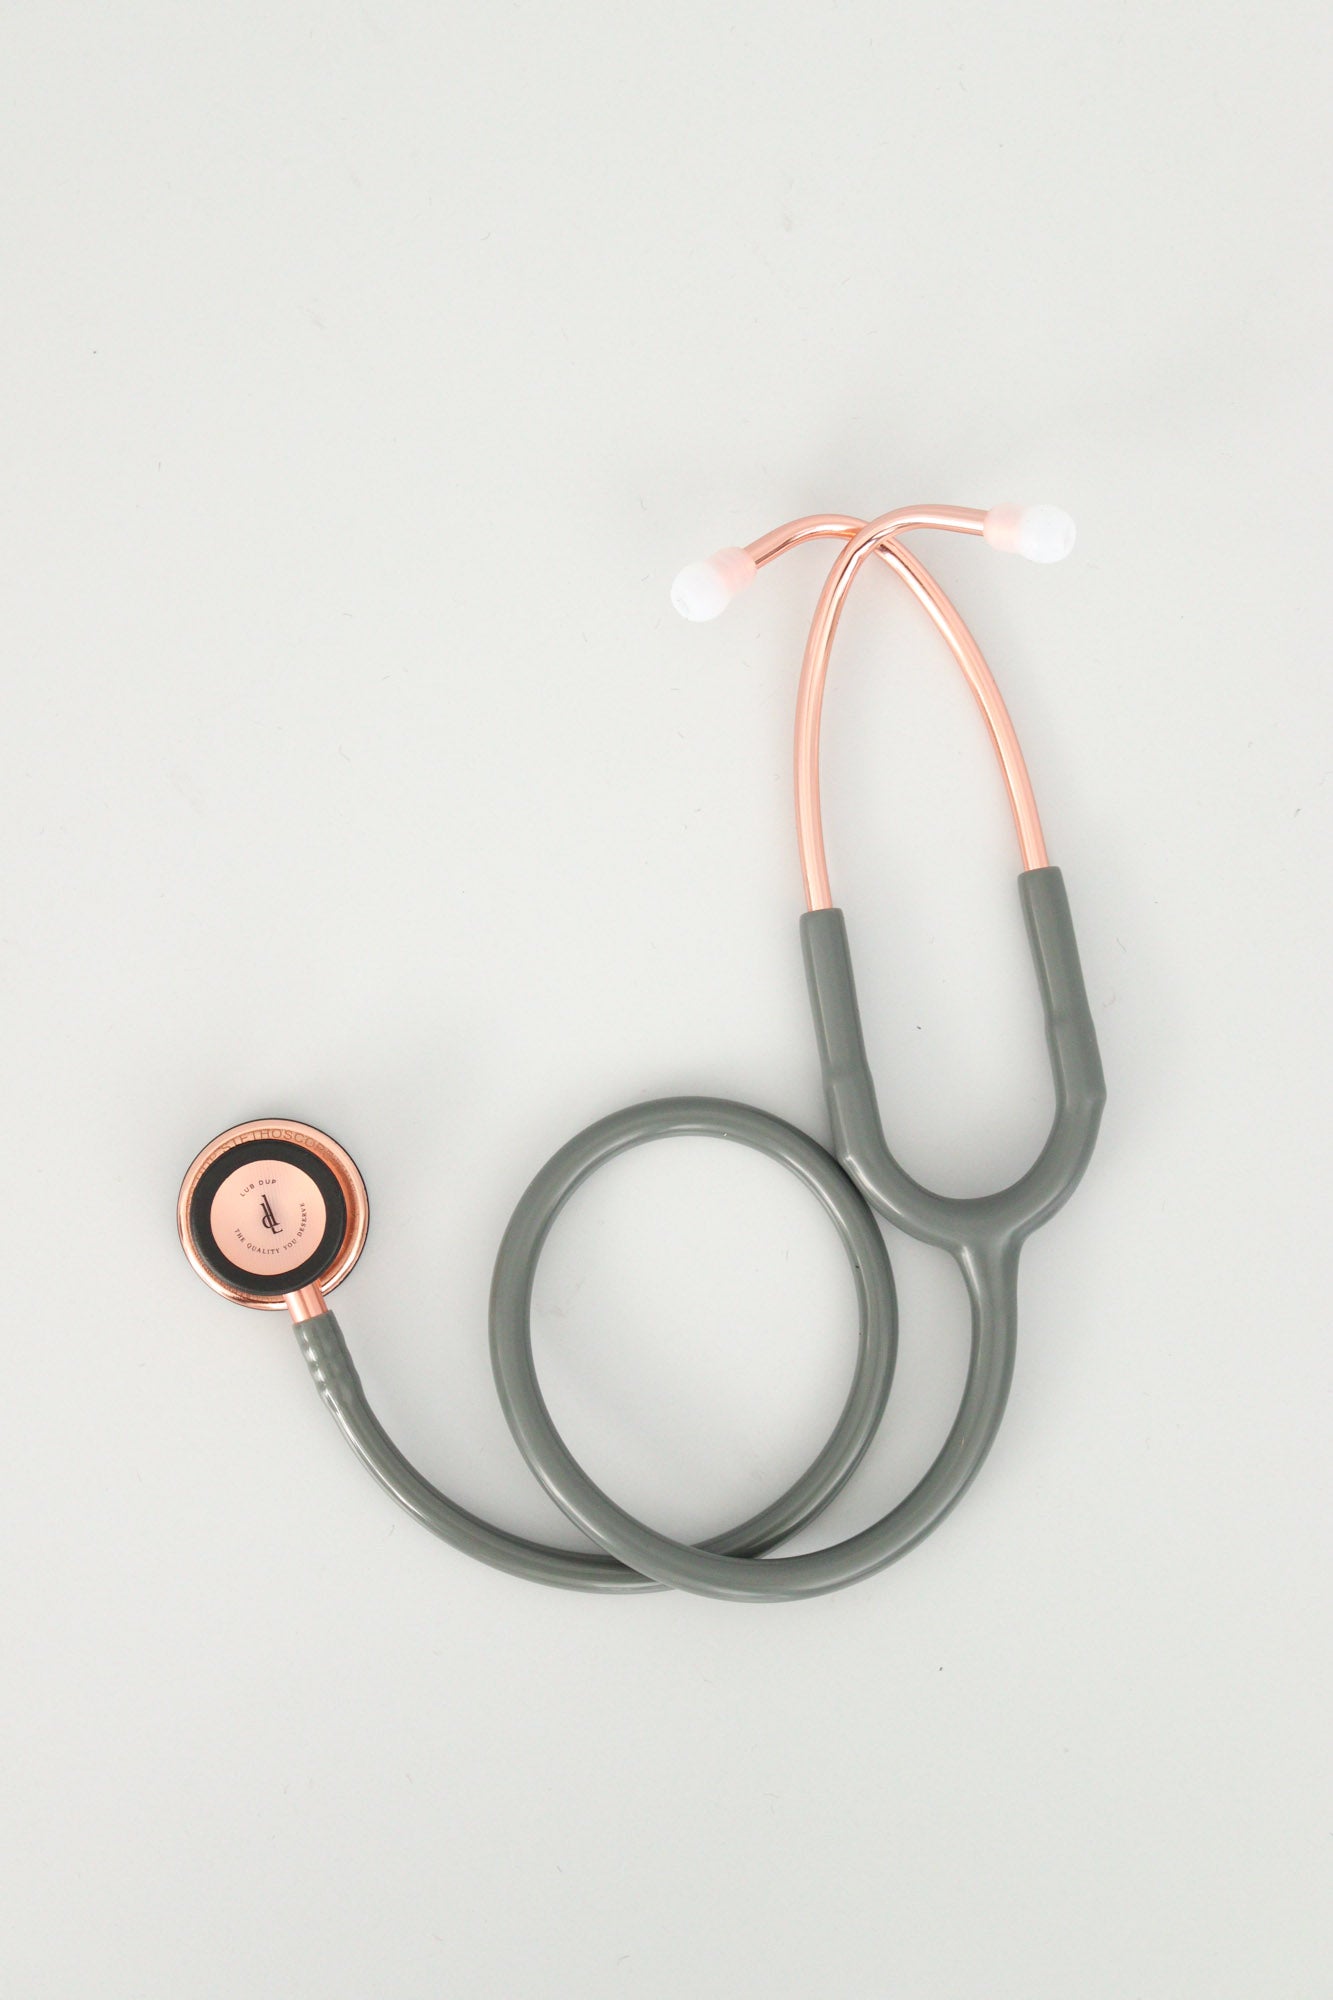 Lub Dup Adult Stethoscope - Gray-Rose Gold Edition